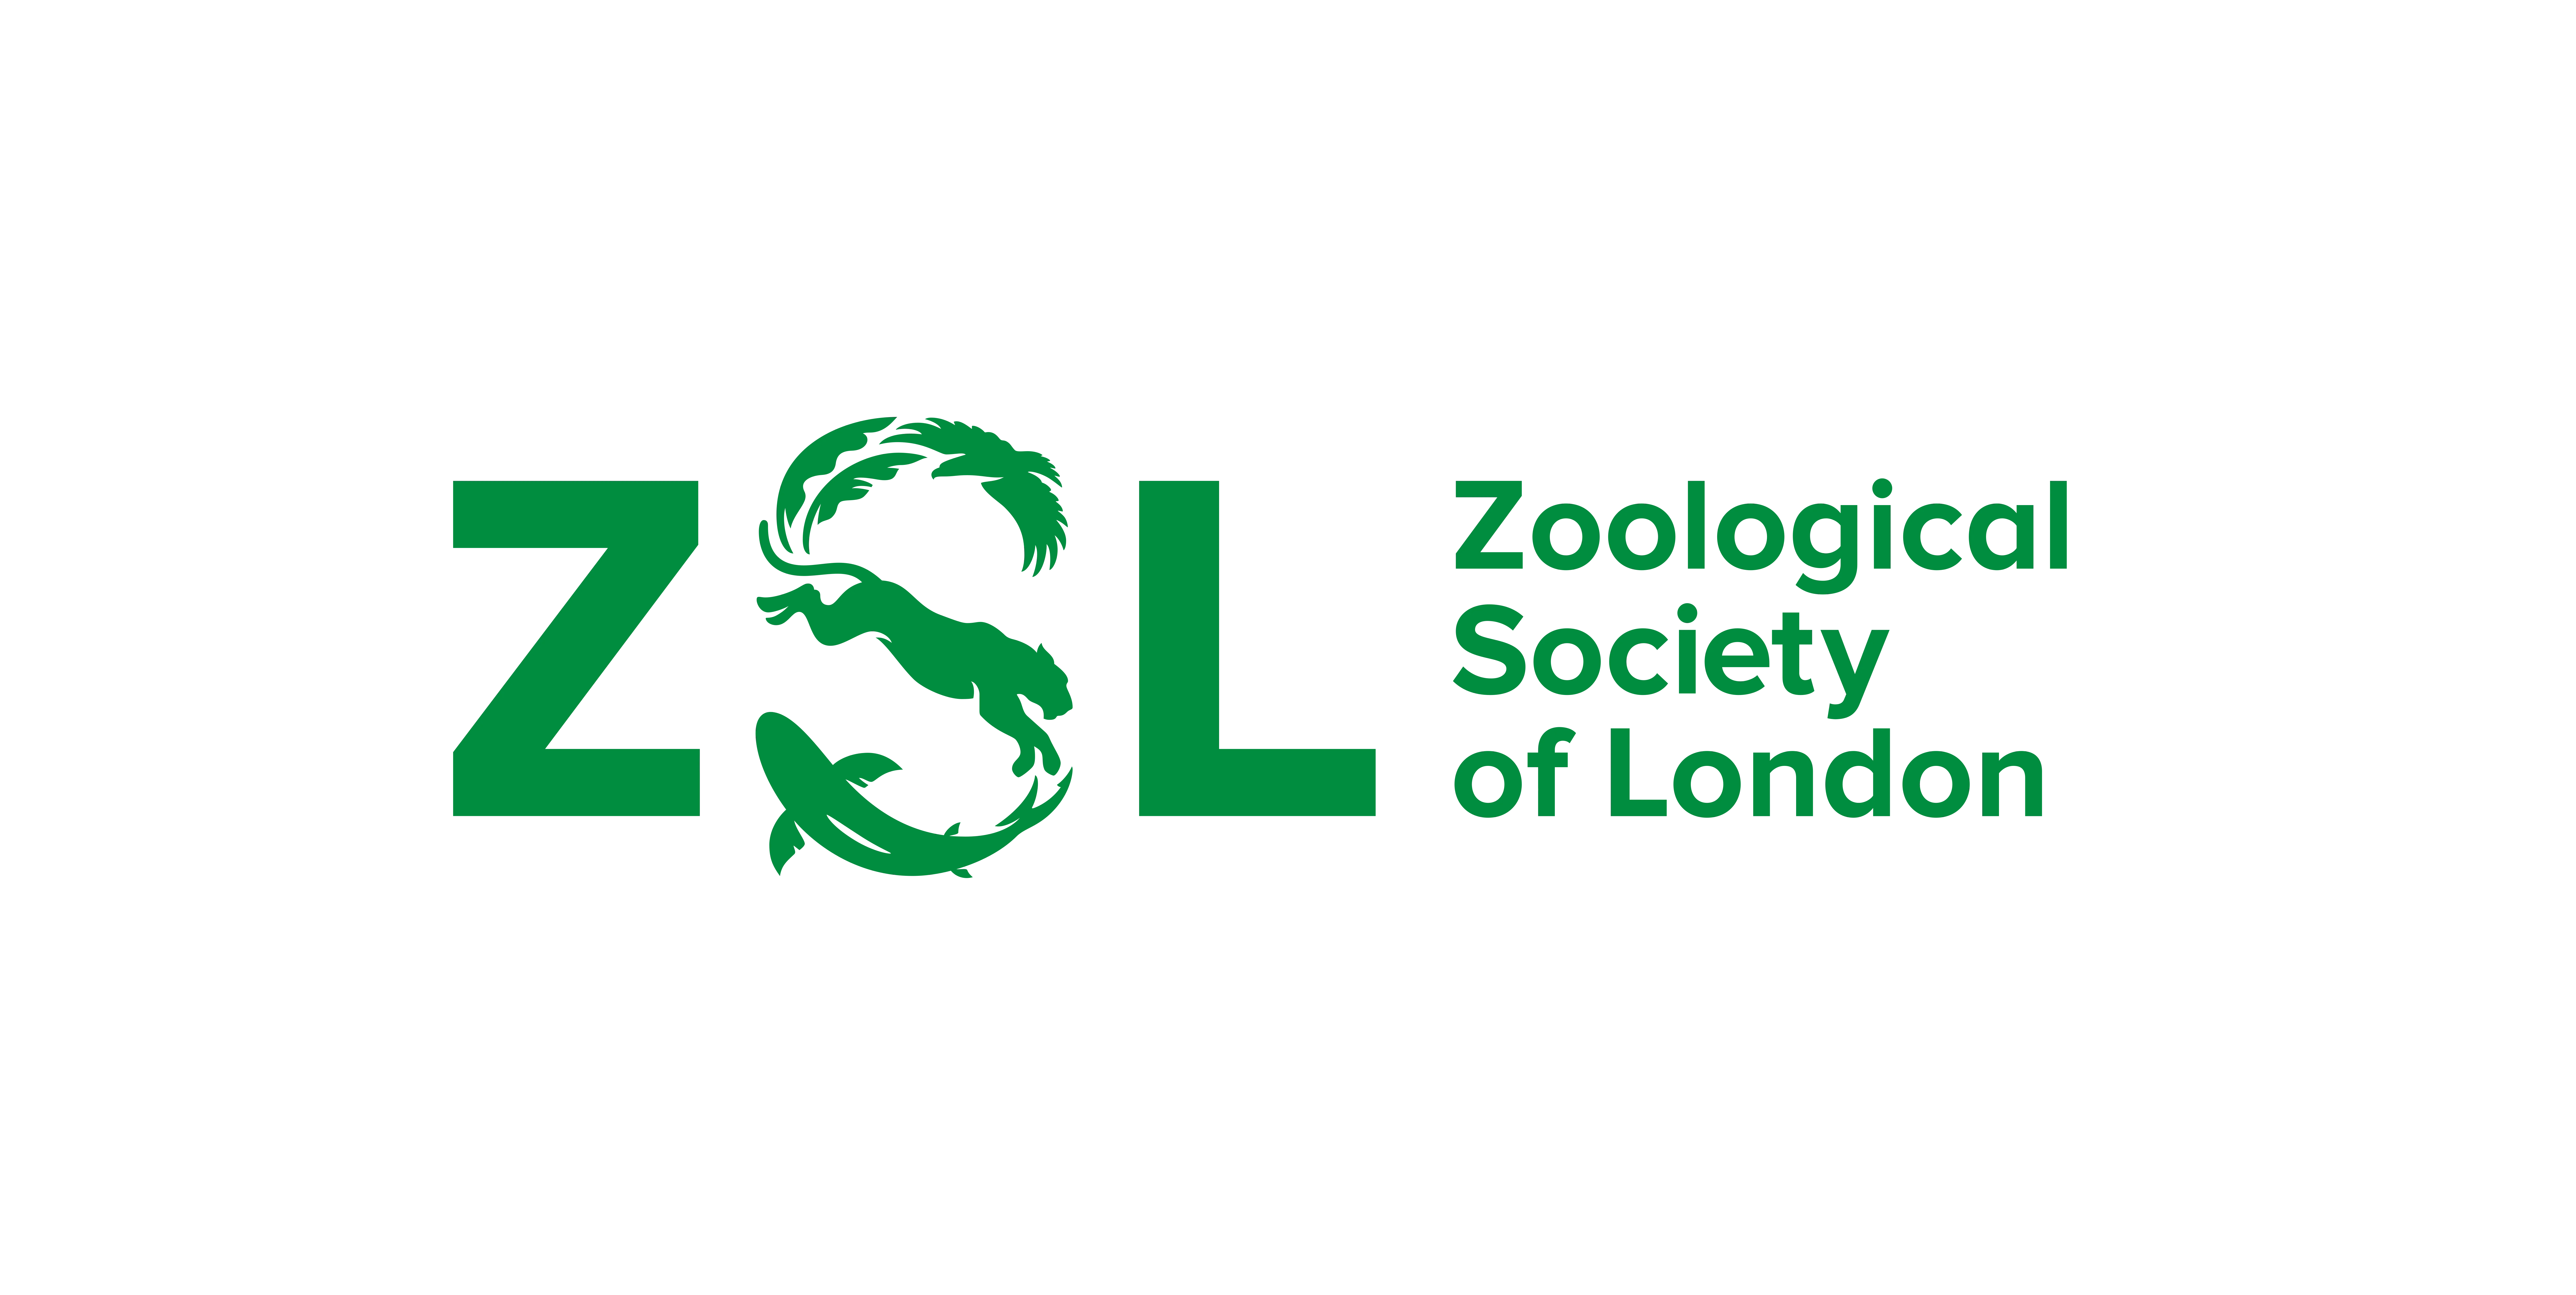 ZSL_From-Lockup_Zoological-Society-of-London_Wide_CMYK_Coated